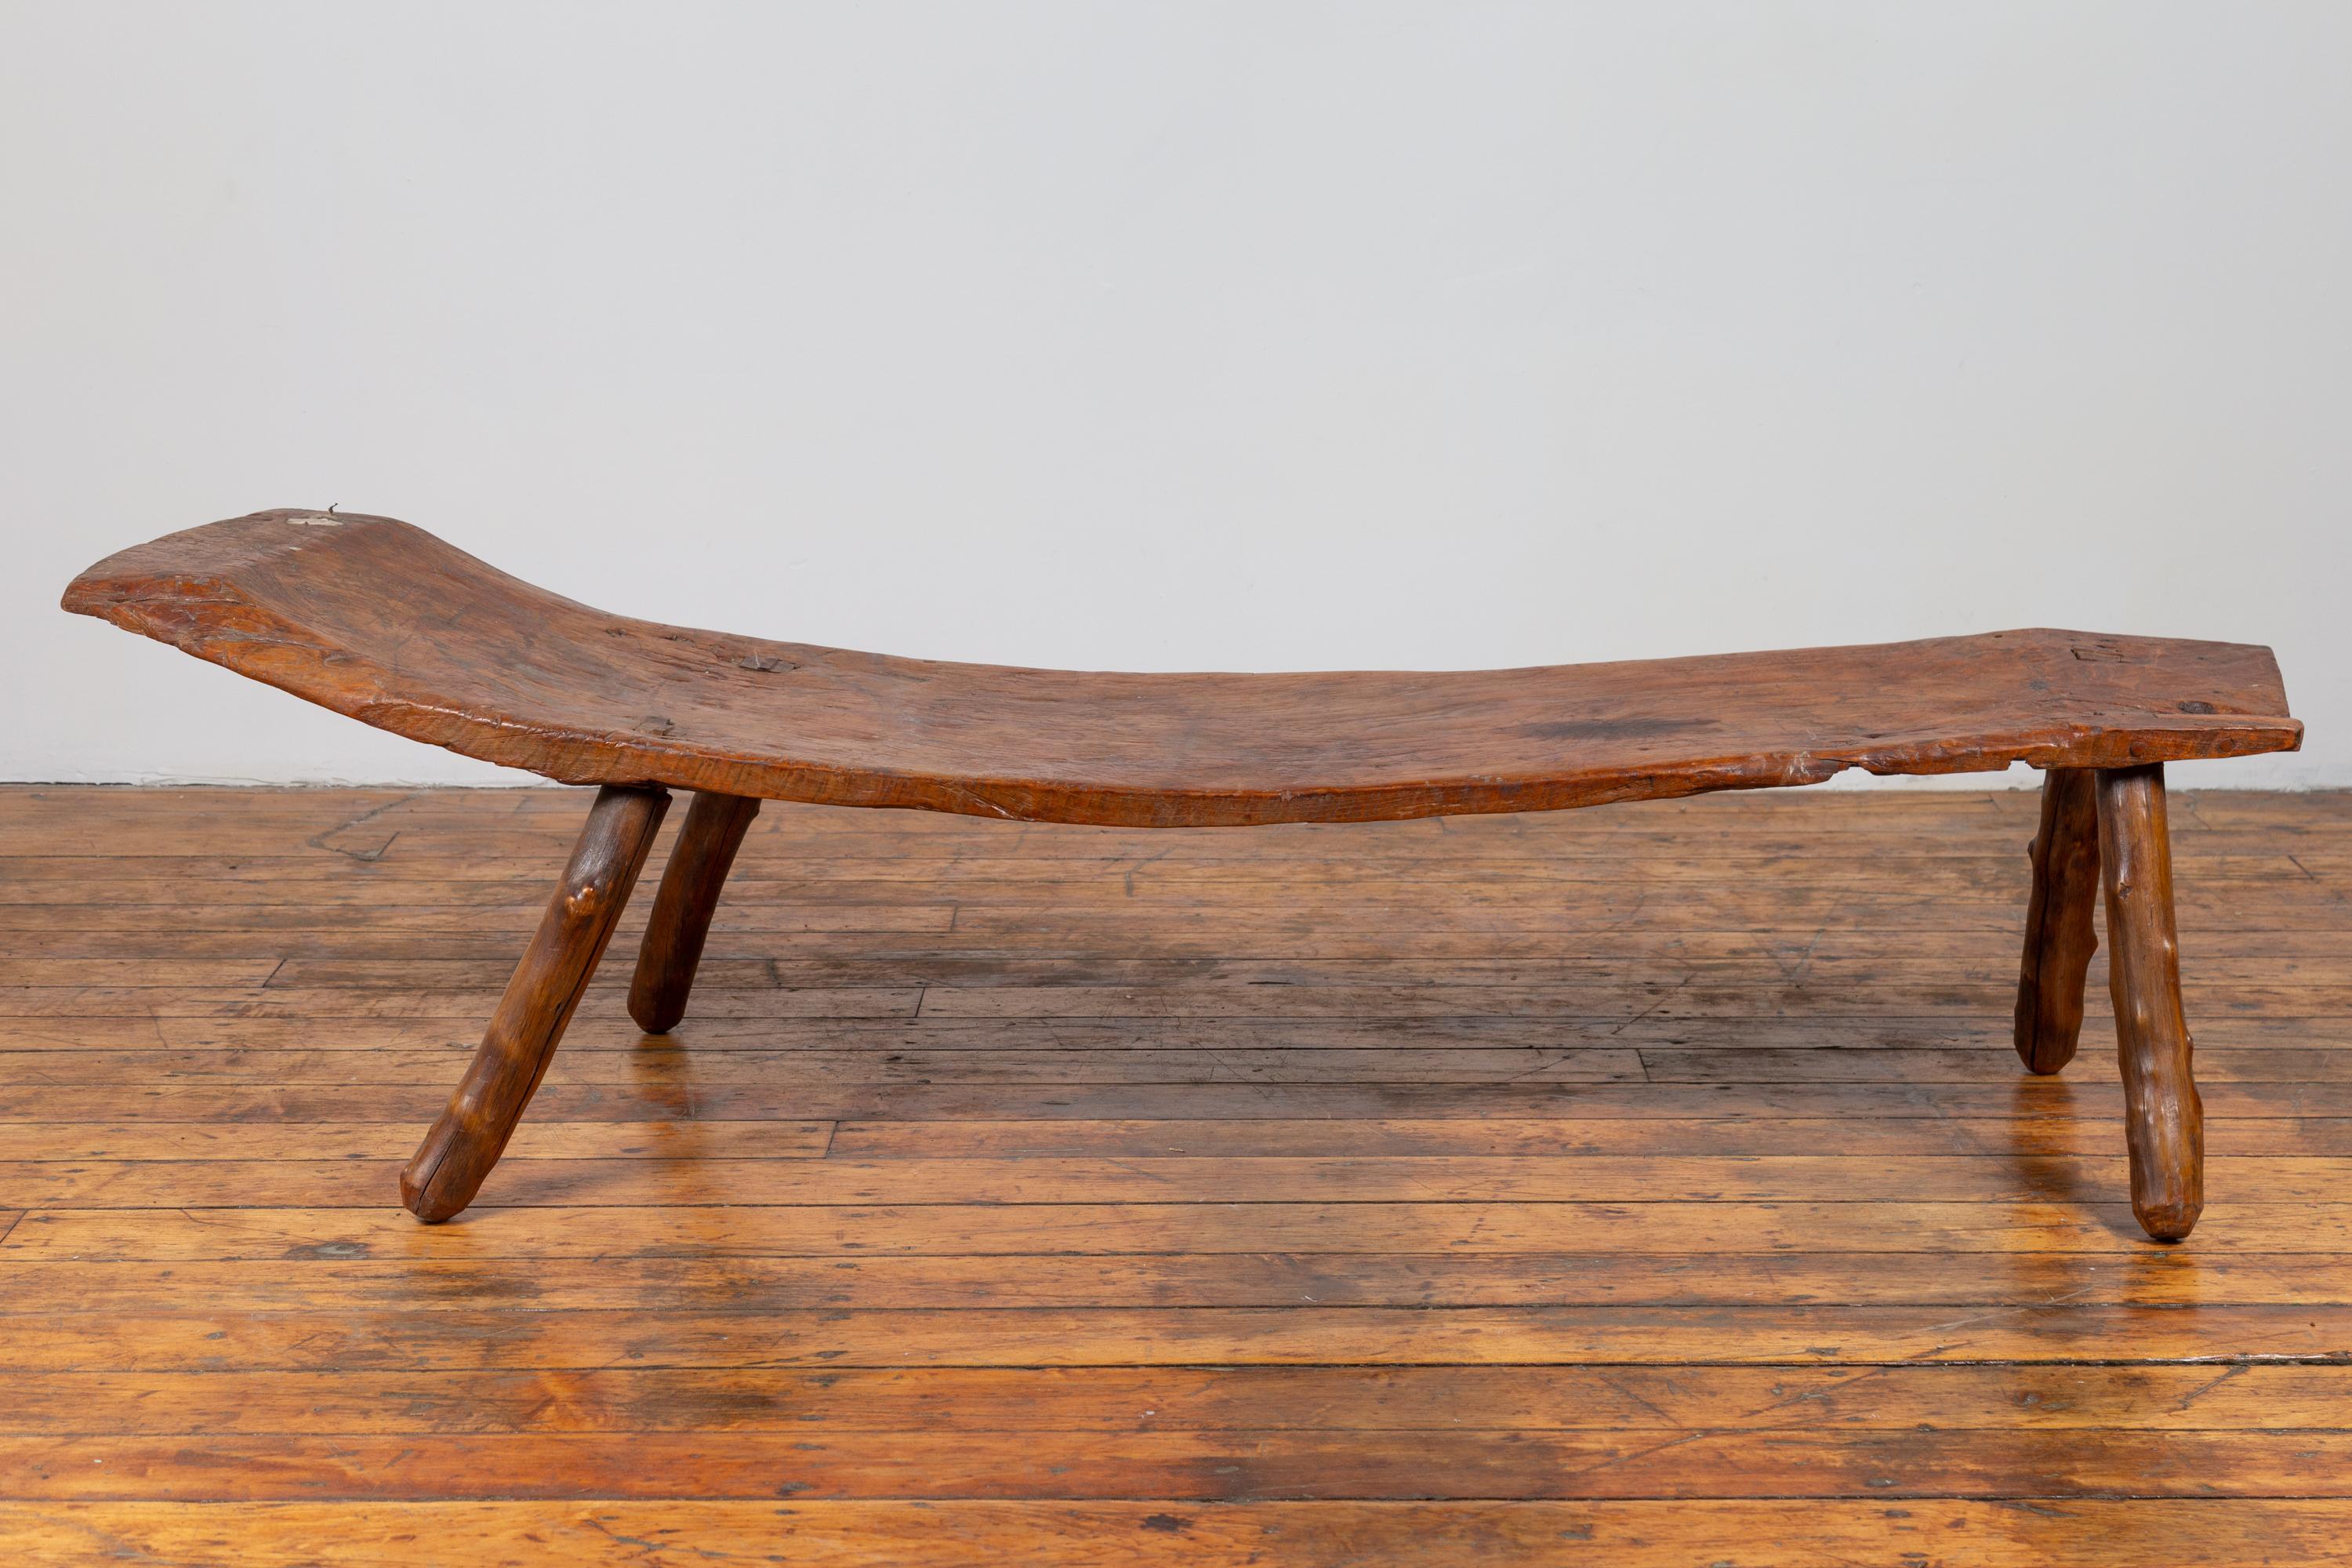 Rustic 19th Century Freeform Javanese Wooden Bench with Weathered Patina 5